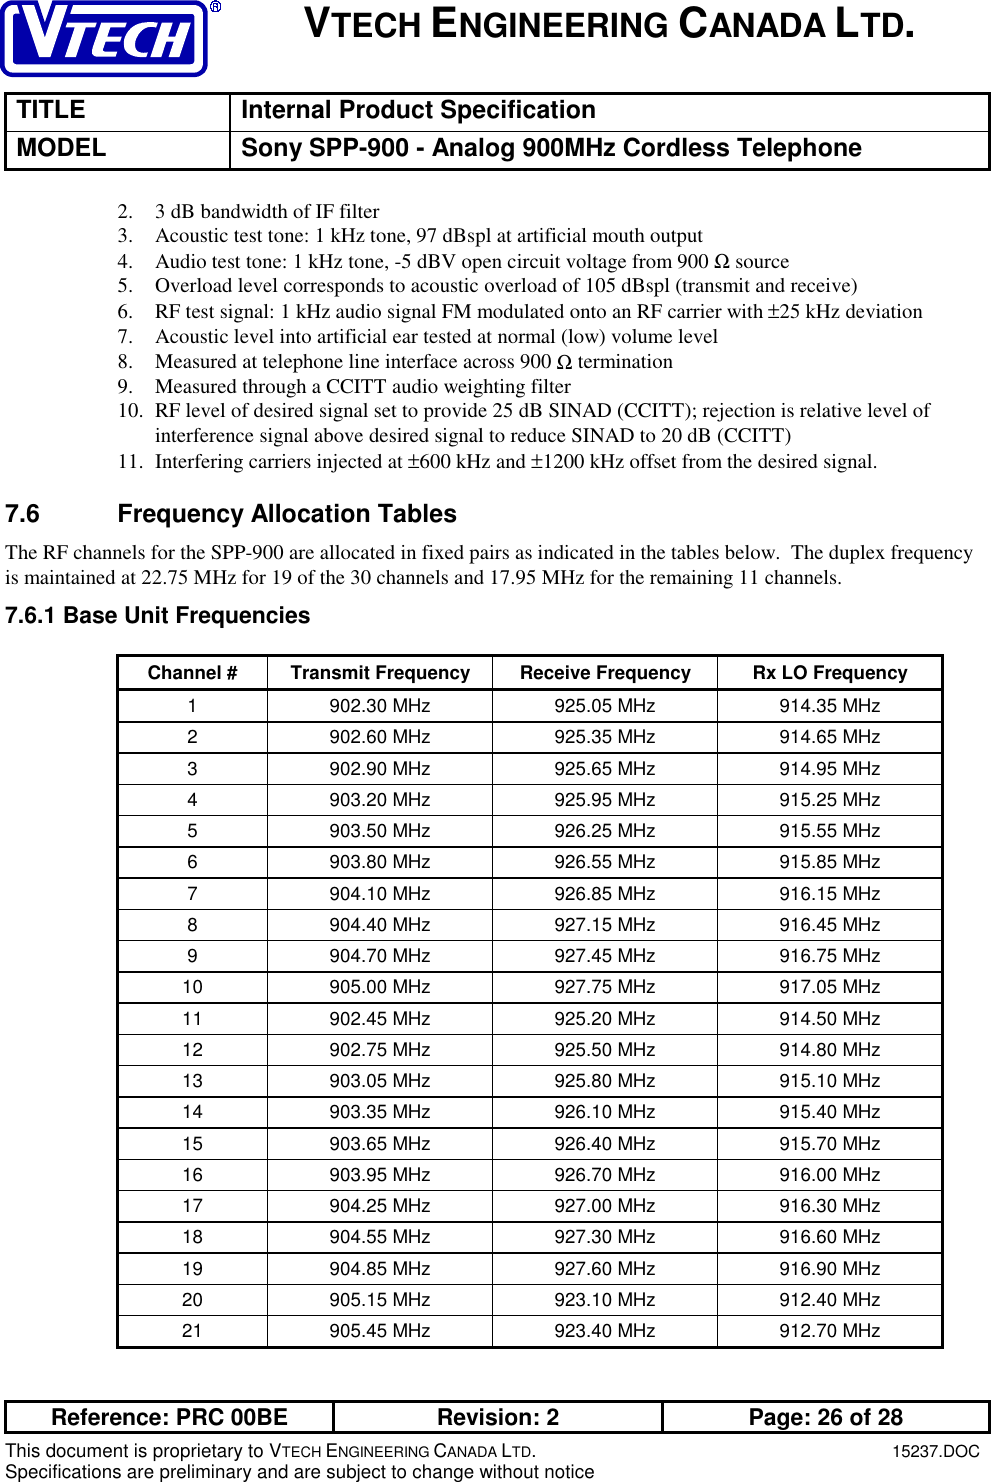 VTECH ENGINEERING CANADA LTD.TITLE Internal Product SpecificationMODEL Sony SPP-900 - Analog 900MHz Cordless TelephoneReference: PRC 00BE Revision: 2 Page: 26 of 28This document is proprietary to VTECH ENGINEERING CANADA LTD.15237.DOCSpecifications are preliminary and are subject to change without notice2. 3 dB bandwidth of IF filter3. Acoustic test tone: 1 kHz tone, 97 dBspl at artificial mouth output4. Audio test tone: 1 kHz tone, -5 dBV open circuit voltage from 900 Ω source5. Overload level corresponds to acoustic overload of 105 dBspl (transmit and receive)6. RF test signal: 1 kHz audio signal FM modulated onto an RF carrier with ±25 kHz deviation7. Acoustic level into artificial ear tested at normal (low) volume level8. Measured at telephone line interface across 900 Ω termination9. Measured through a CCITT audio weighting filter10. RF level of desired signal set to provide 25 dB SINAD (CCITT); rejection is relative level ofinterference signal above desired signal to reduce SINAD to 20 dB (CCITT)11. Interfering carriers injected at ±600 kHz and ±1200 kHz offset from the desired signal.7.6  Frequency Allocation TablesThe RF channels for the SPP-900 are allocated in fixed pairs as indicated in the tables below.  The duplex frequencyis maintained at 22.75 MHz for 19 of the 30 channels and 17.95 MHz for the remaining 11 channels.7.6.1 Base Unit FrequenciesChannel # Transmit Frequency Receive Frequency Rx LO Frequency1 902.30 MHz 925.05 MHz 914.35 MHz2 902.60 MHz 925.35 MHz 914.65 MHz3 902.90 MHz 925.65 MHz 914.95 MHz4 903.20 MHz 925.95 MHz 915.25 MHz5 903.50 MHz 926.25 MHz 915.55 MHz6 903.80 MHz 926.55 MHz 915.85 MHz7 904.10 MHz 926.85 MHz 916.15 MHz8 904.40 MHz 927.15 MHz 916.45 MHz9 904.70 MHz 927.45 MHz 916.75 MHz10 905.00 MHz 927.75 MHz 917.05 MHz11 902.45 MHz 925.20 MHz 914.50 MHz12 902.75 MHz 925.50 MHz 914.80 MHz13 903.05 MHz 925.80 MHz 915.10 MHz14 903.35 MHz 926.10 MHz 915.40 MHz15 903.65 MHz 926.40 MHz 915.70 MHz16 903.95 MHz 926.70 MHz 916.00 MHz17 904.25 MHz 927.00 MHz 916.30 MHz18 904.55 MHz 927.30 MHz 916.60 MHz19 904.85 MHz 927.60 MHz 916.90 MHz20 905.15 MHz 923.10 MHz 912.40 MHz21 905.45 MHz 923.40 MHz 912.70 MHz